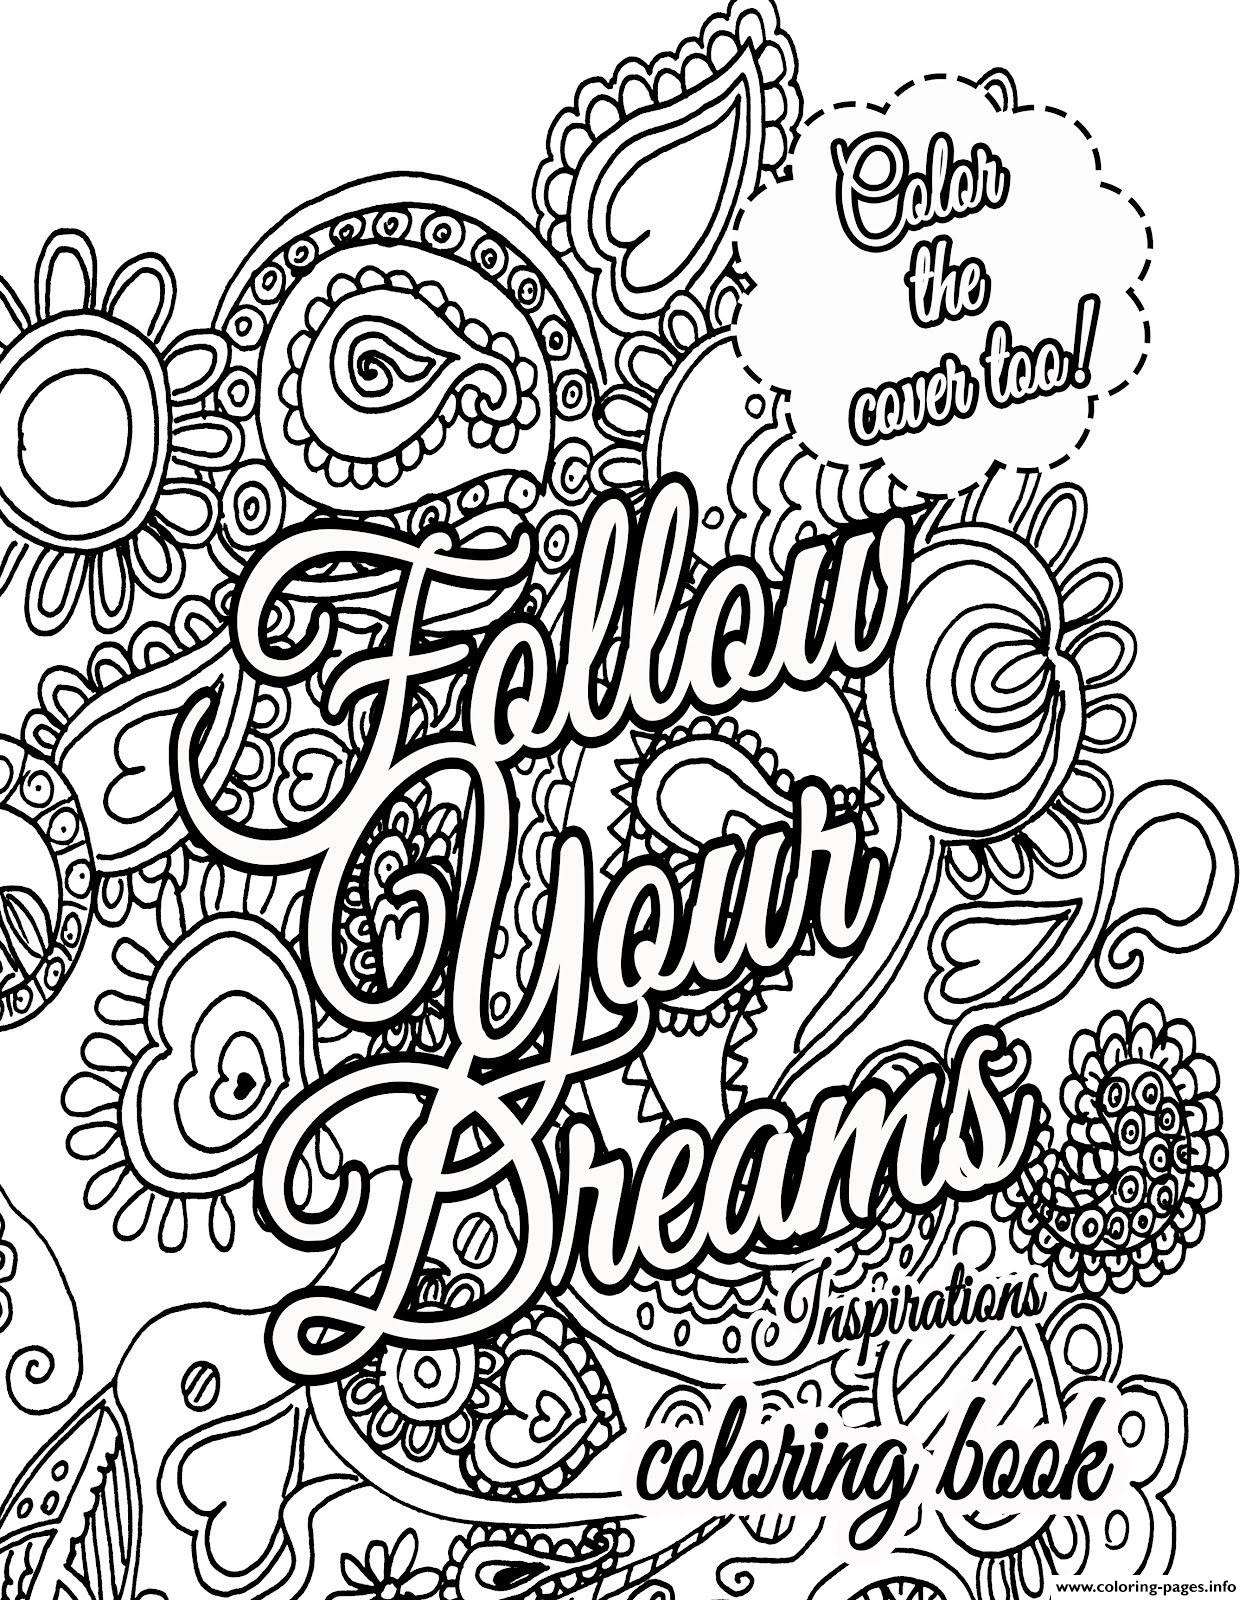 Free Printable Coloring Pages With Quotes Adult Coloring Pages Quotes Photo Album Sabadaphnecottage